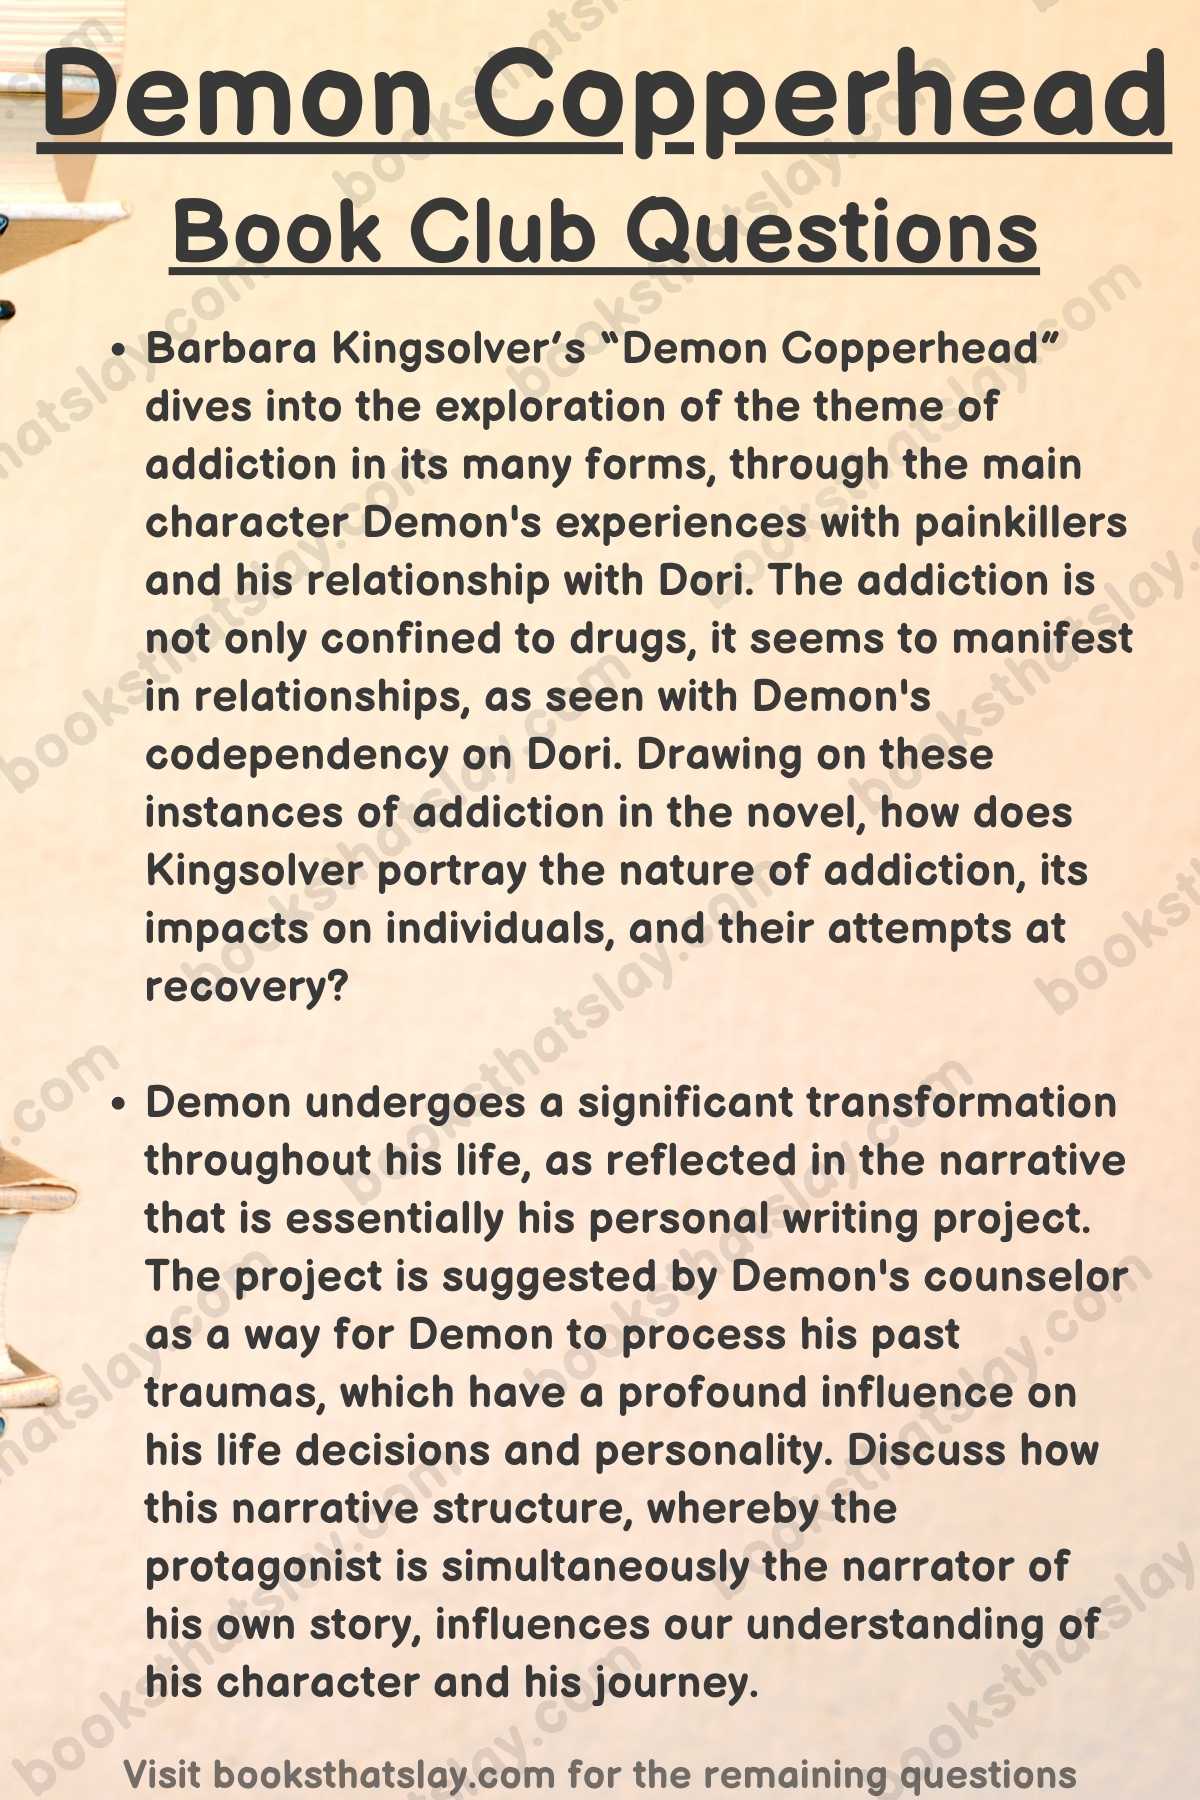 Demon Copperhead Book Club Questions Infographic